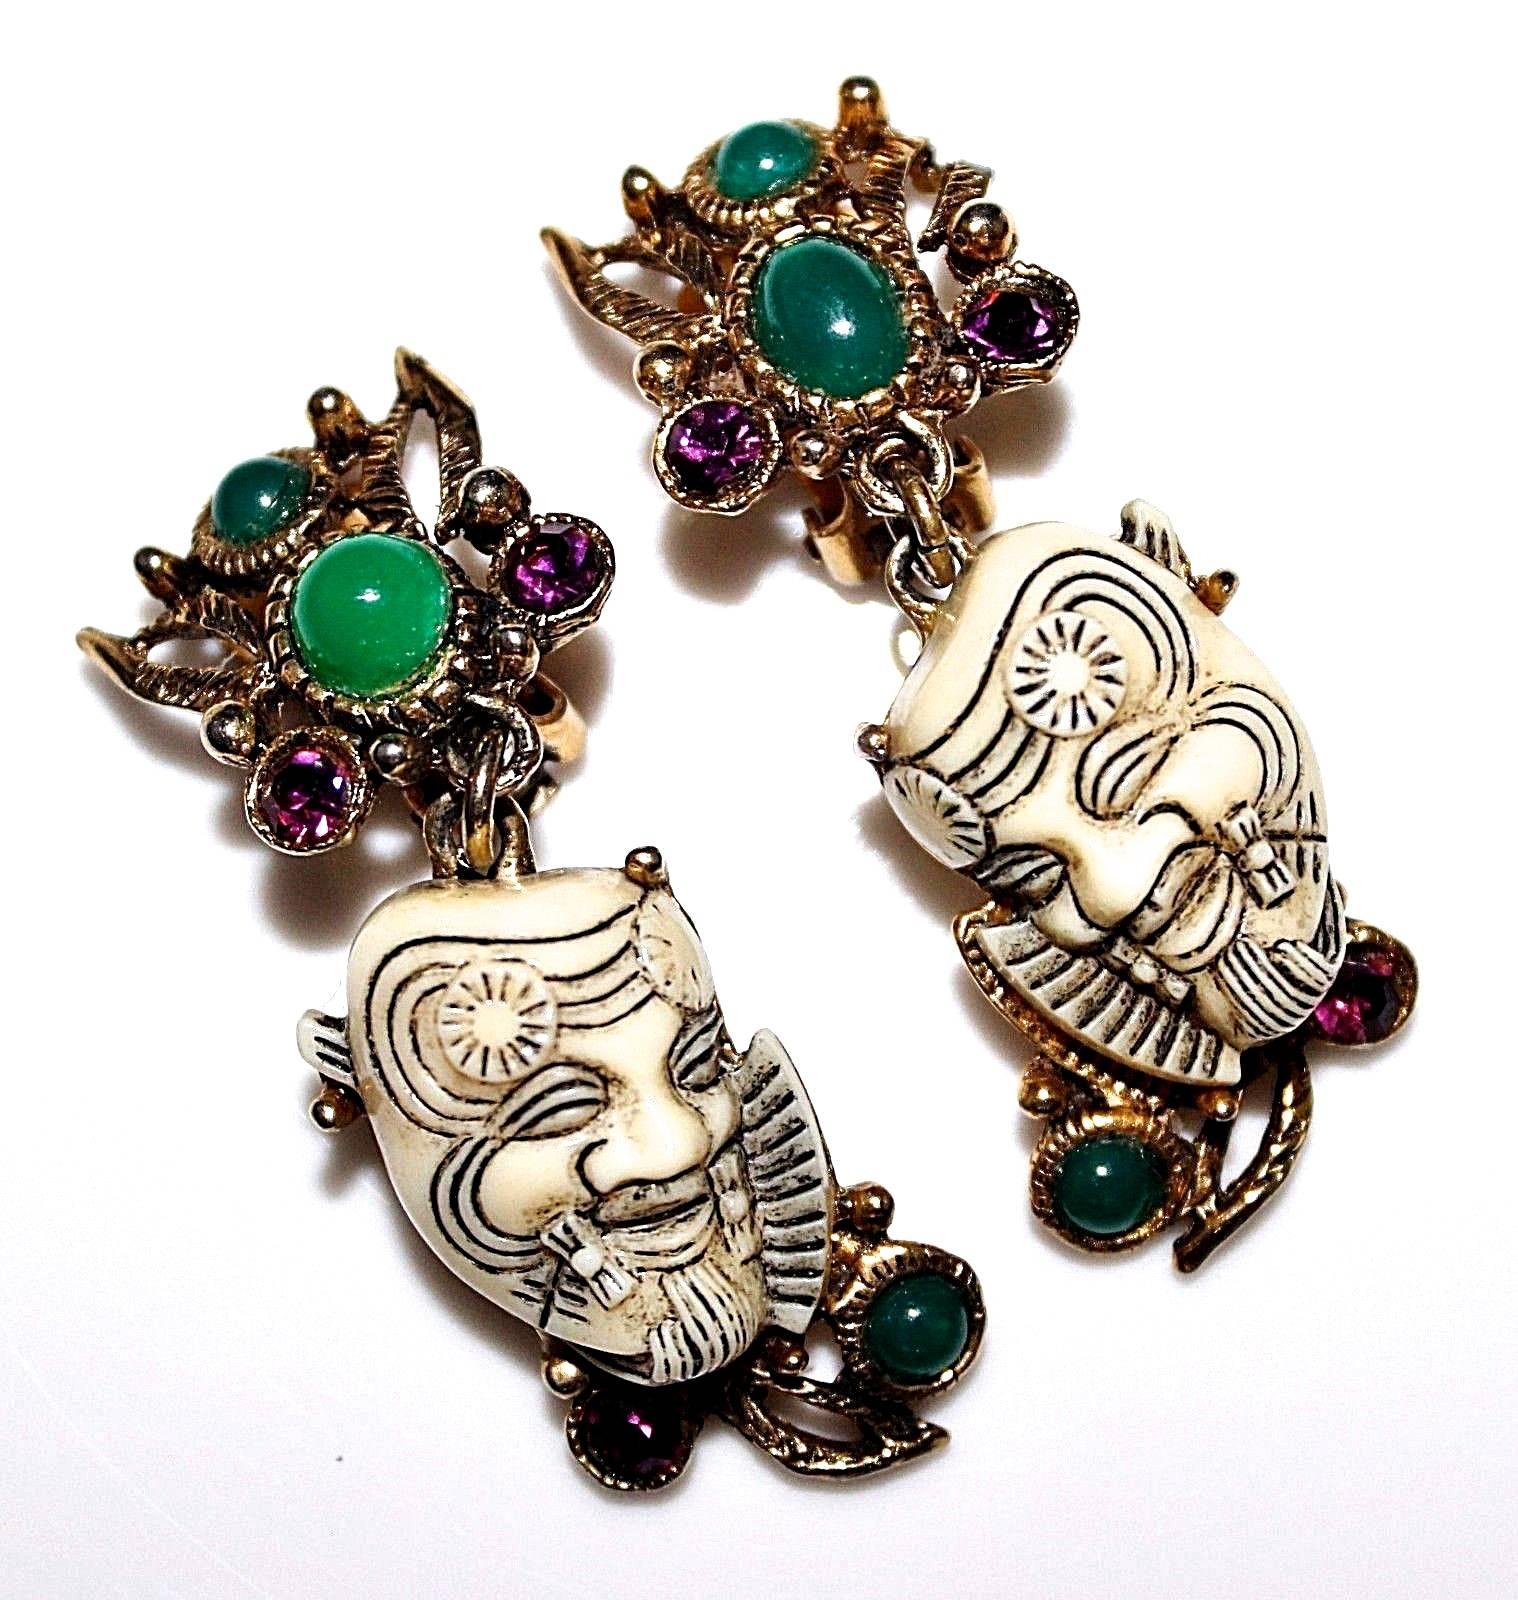 Presesnted here is an extremely rare pair of earrings from Selro. This signed pair of earrings features an Asian devil 'Noh.' This pair of dangle earrings is comprised of a gold tone metal frame with encrusted cabochon gems. The pair of earrings